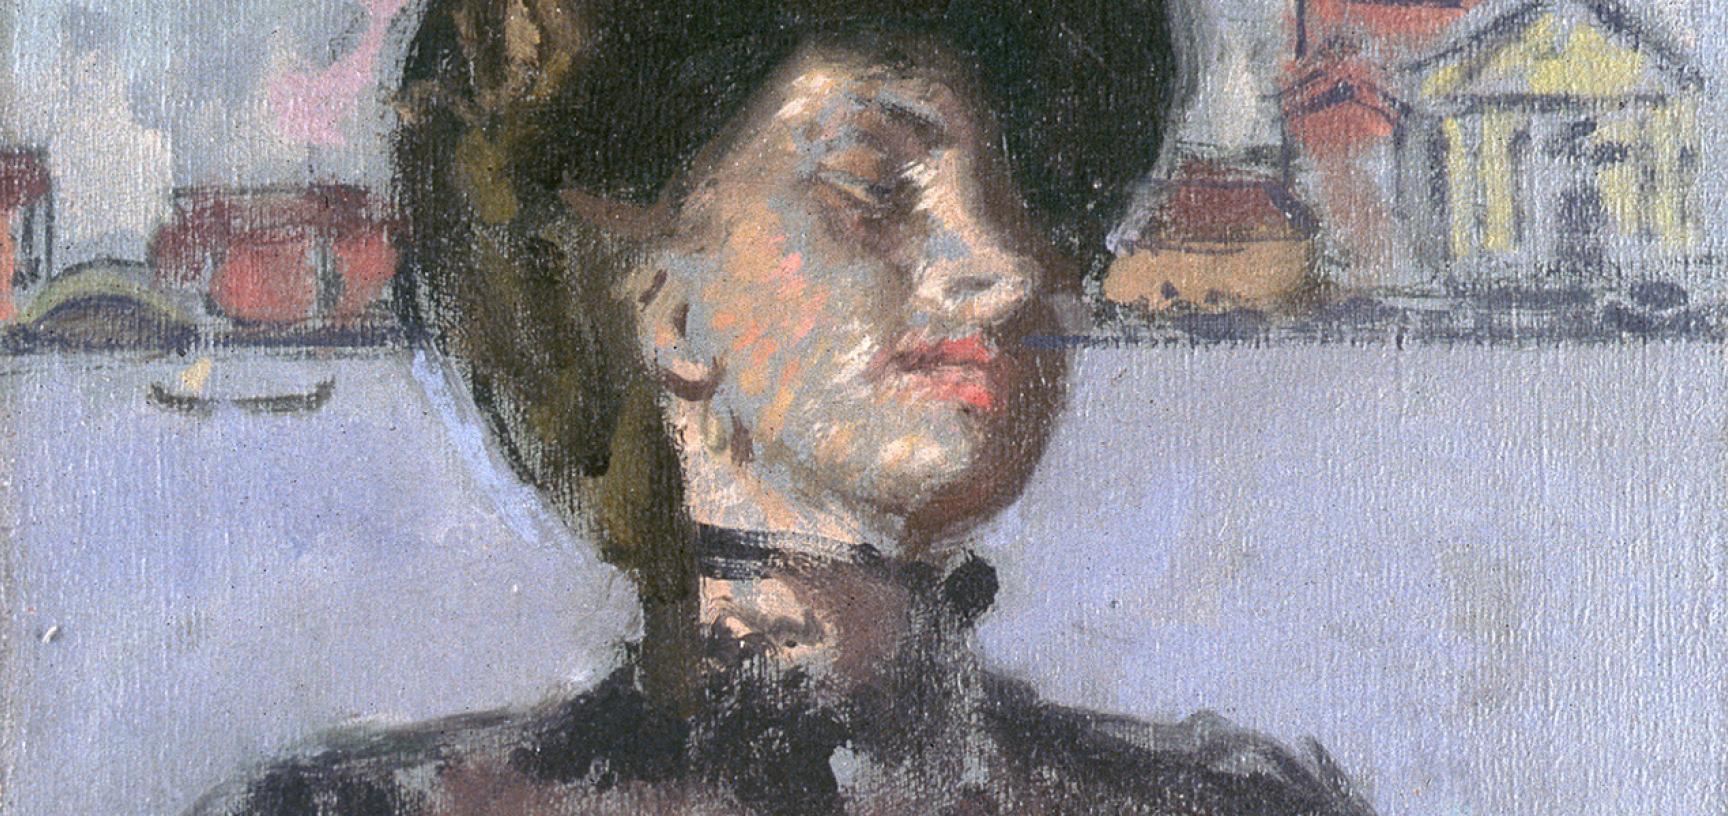 SICKERT AND HIS CONTEMPORARIES Modern Art Galleries at the Ashmolean Museum 